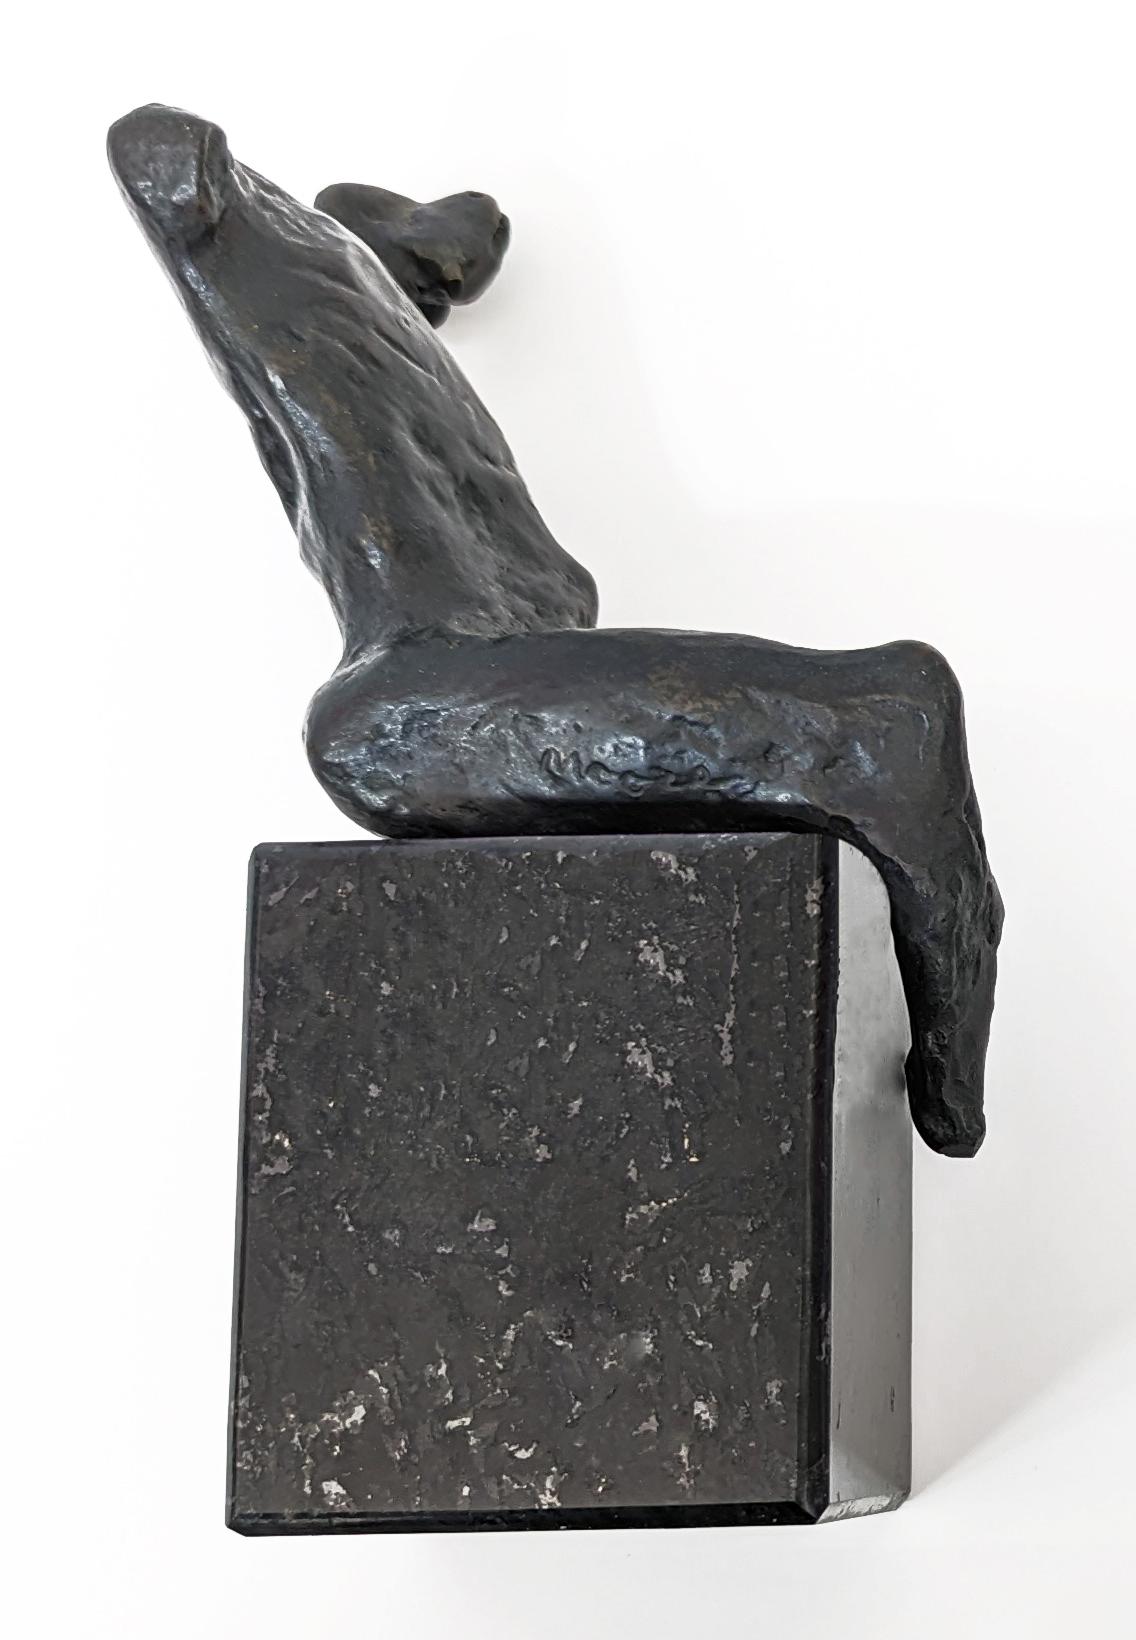 MAQUETTE FOR WARRIOR WITHOUT SHIELD - Contemporary Sculpture by Henry Moore